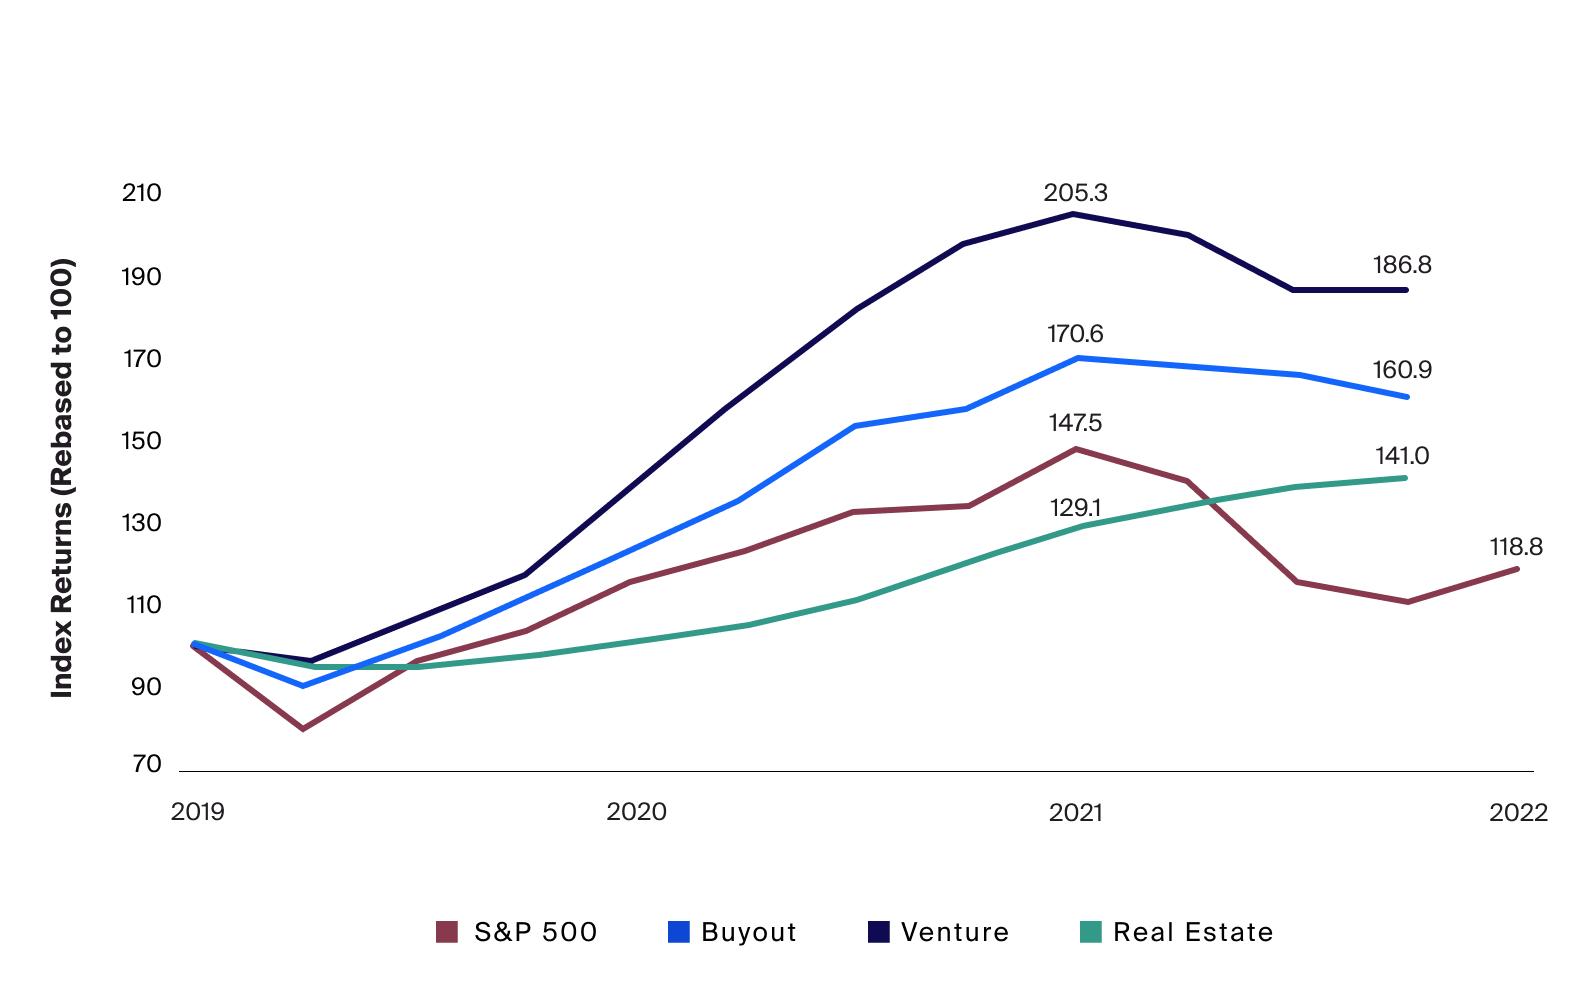 Private market valuations have remained relatively resilient as public equities fell through 2022 (Exhibit 2)